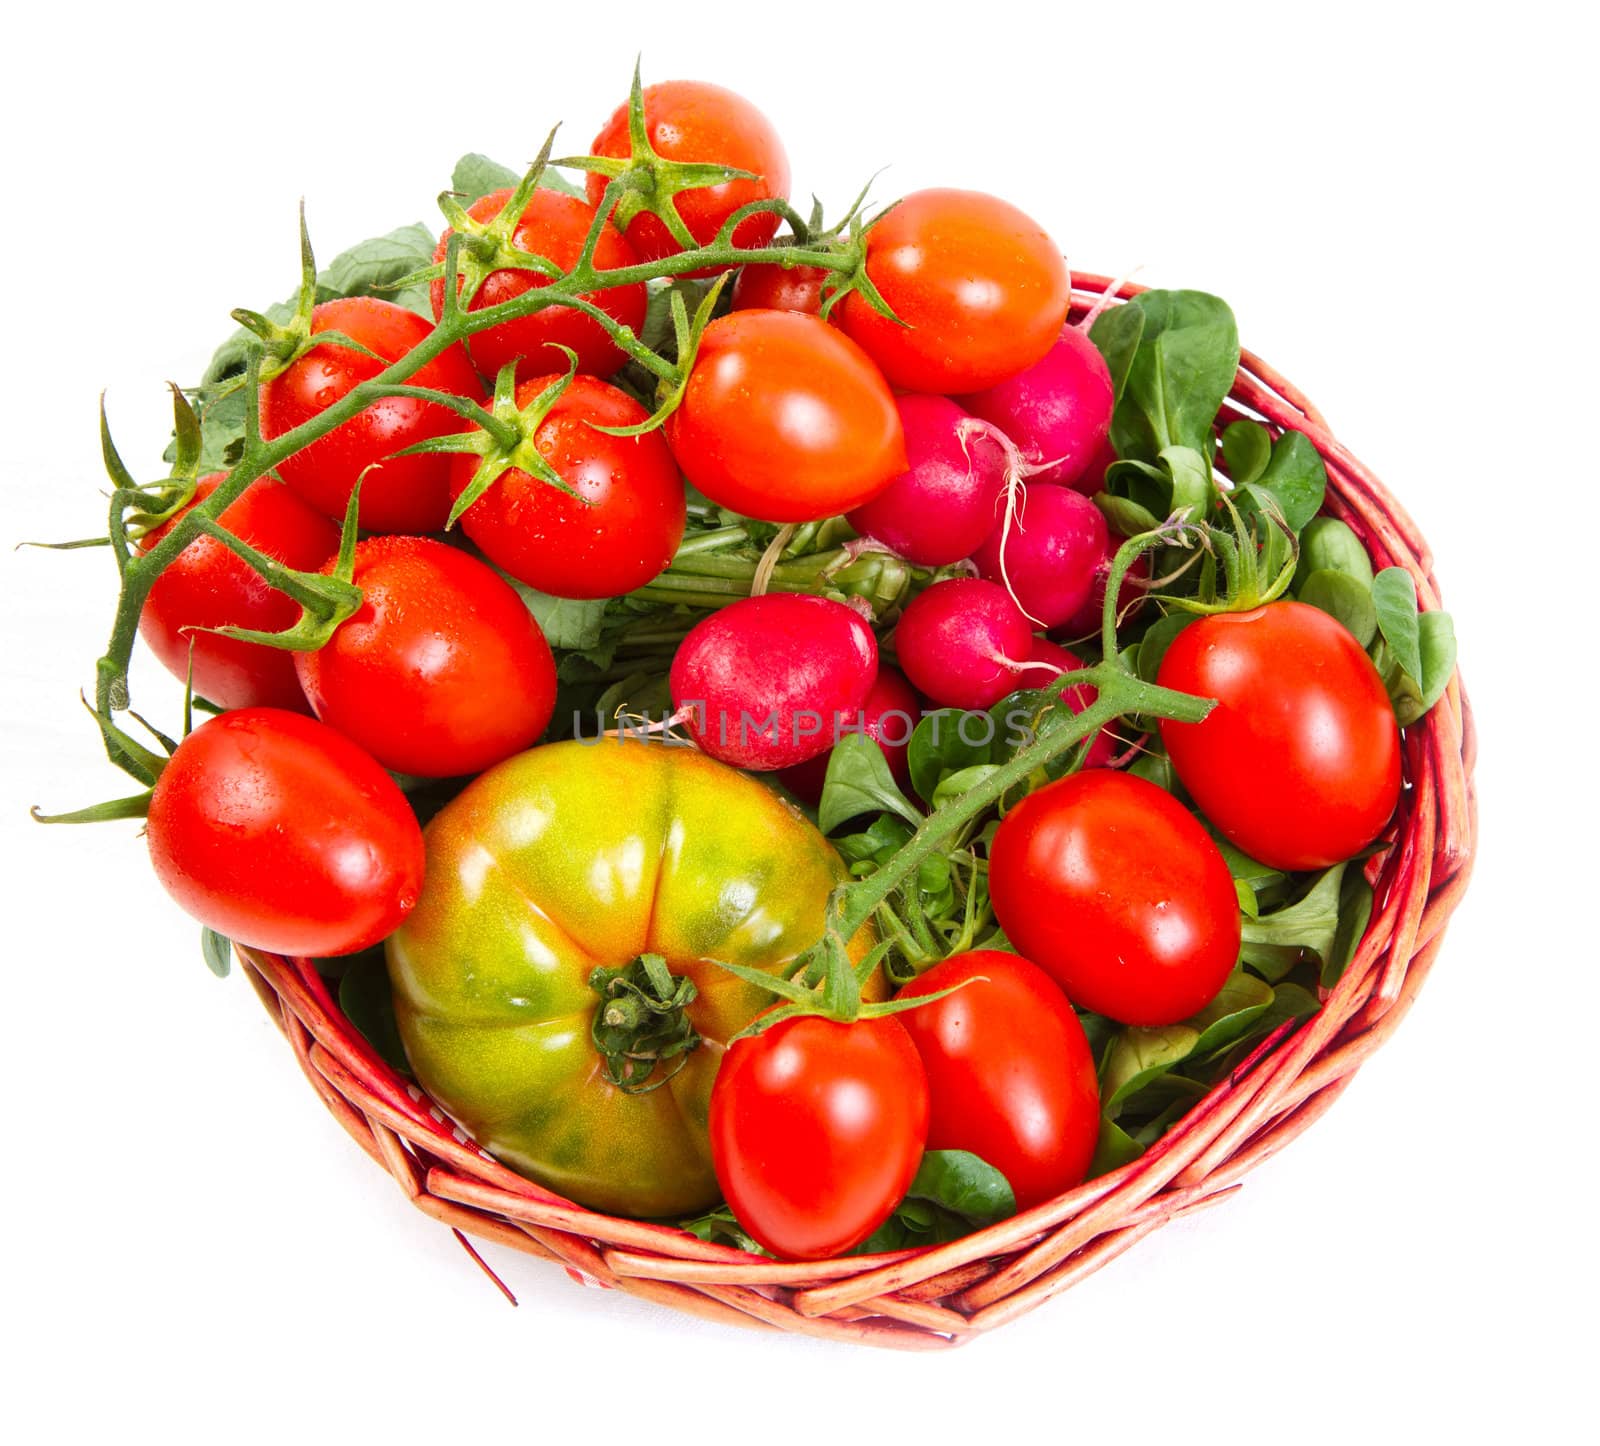 tomatoes in a basket by lsantilli